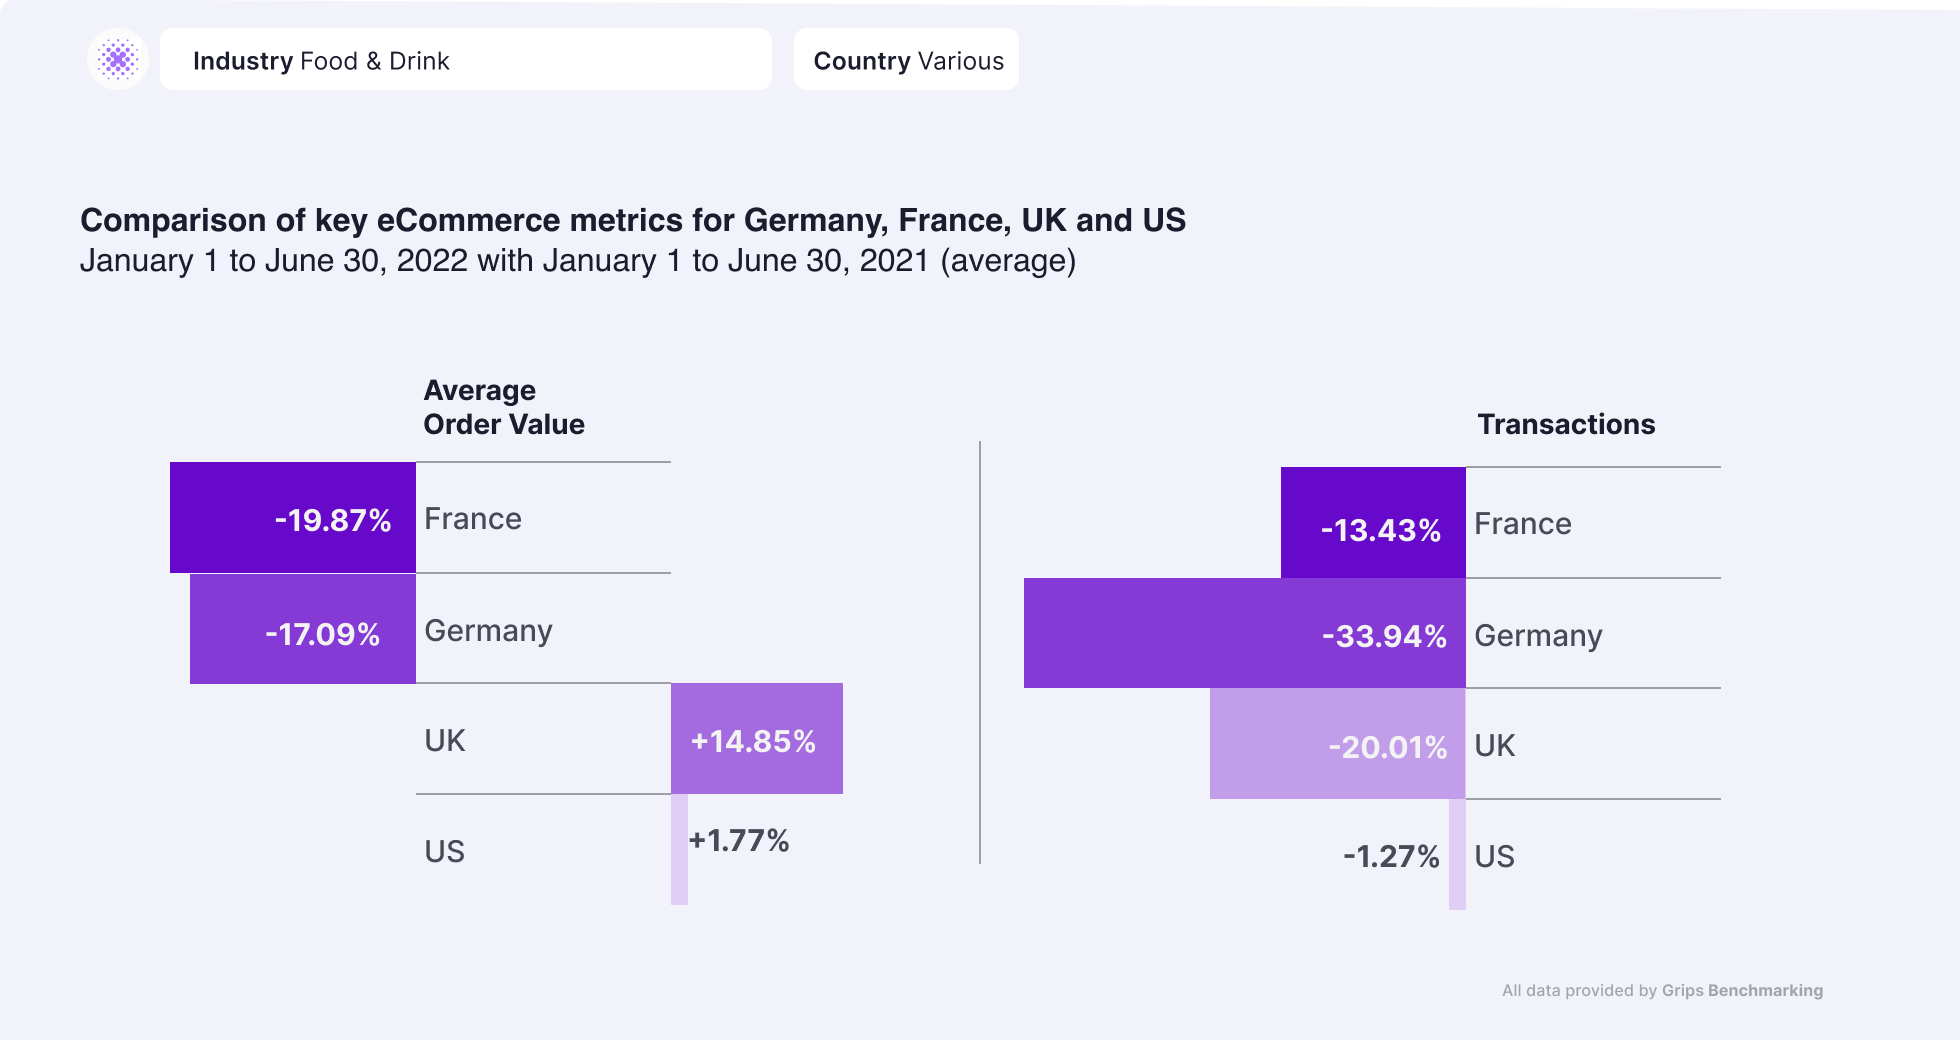 key ecommerce metrics in food & drink industry in germany, france, uk and the us